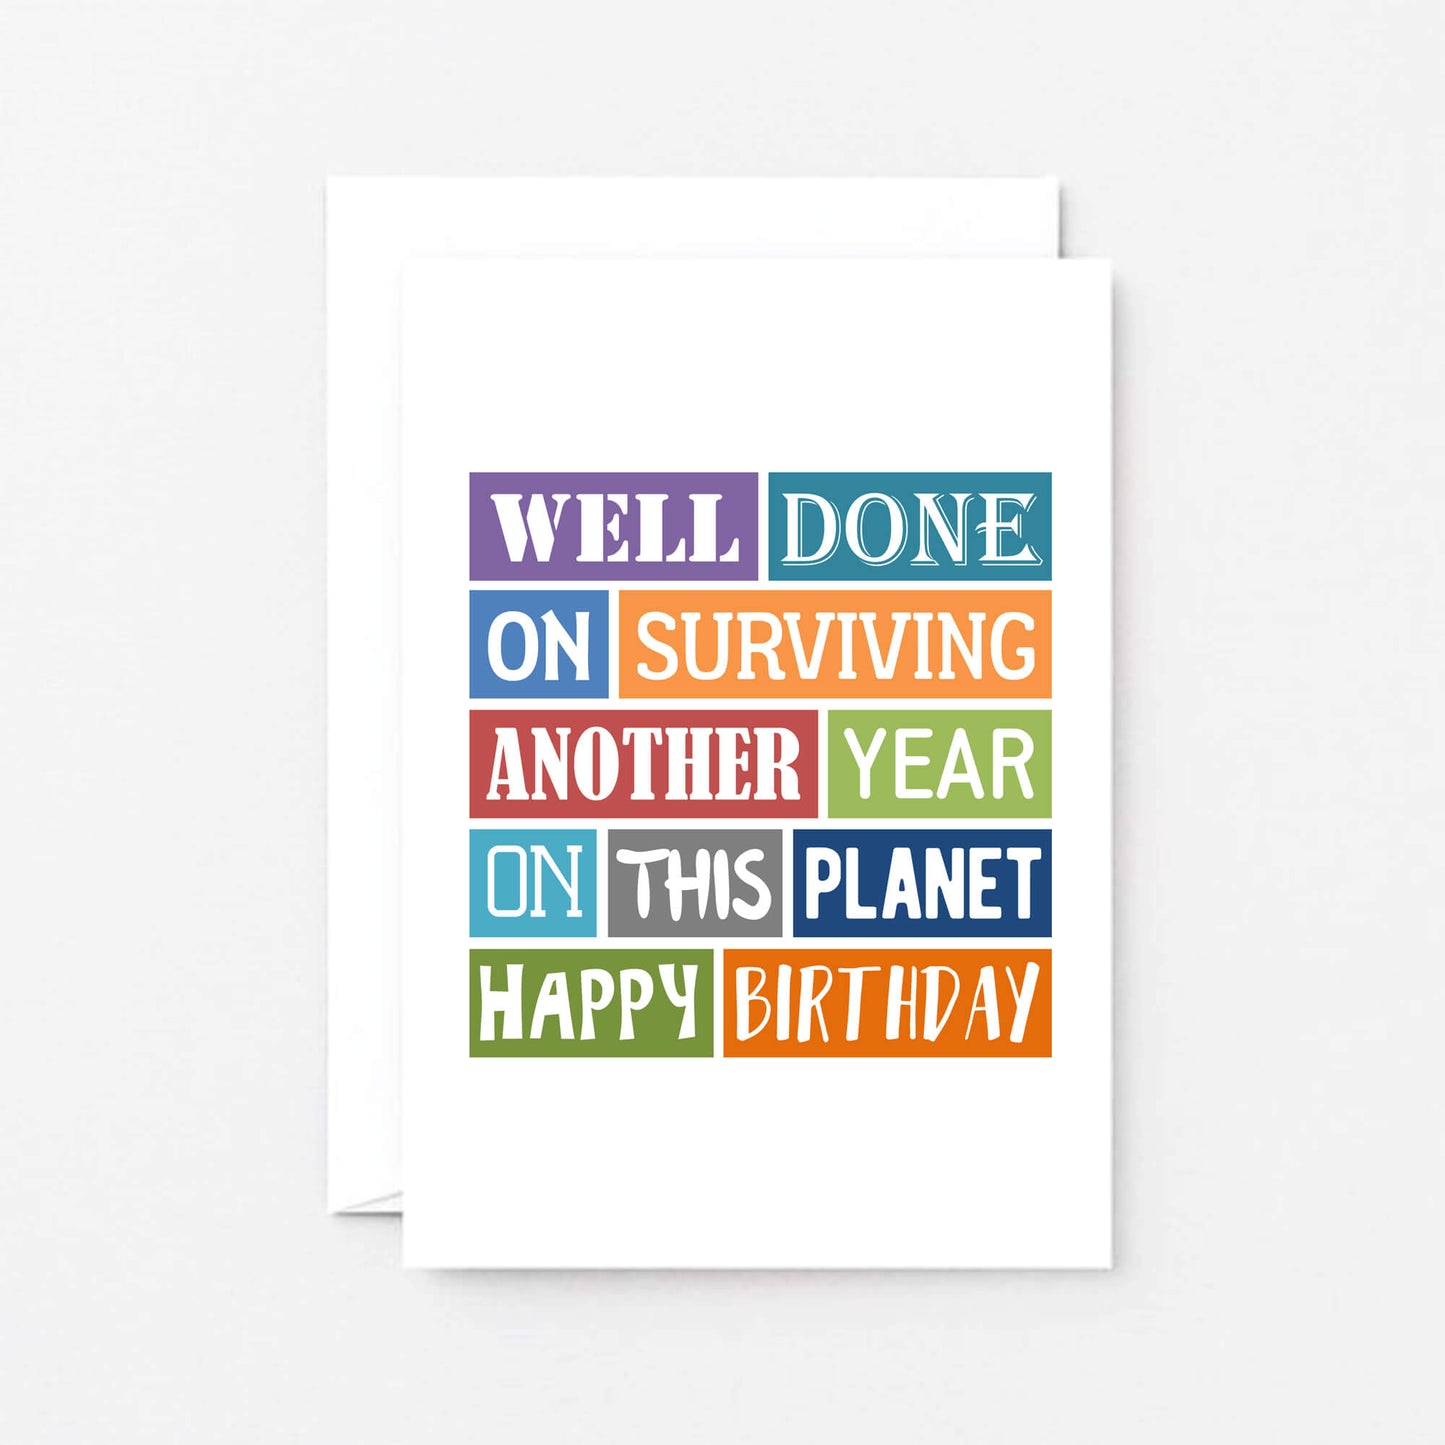 Birthday Card by SixElevenCreations. Reads Well done on surviving another year on this planet. Happy birthday. Product Code SE0156A6